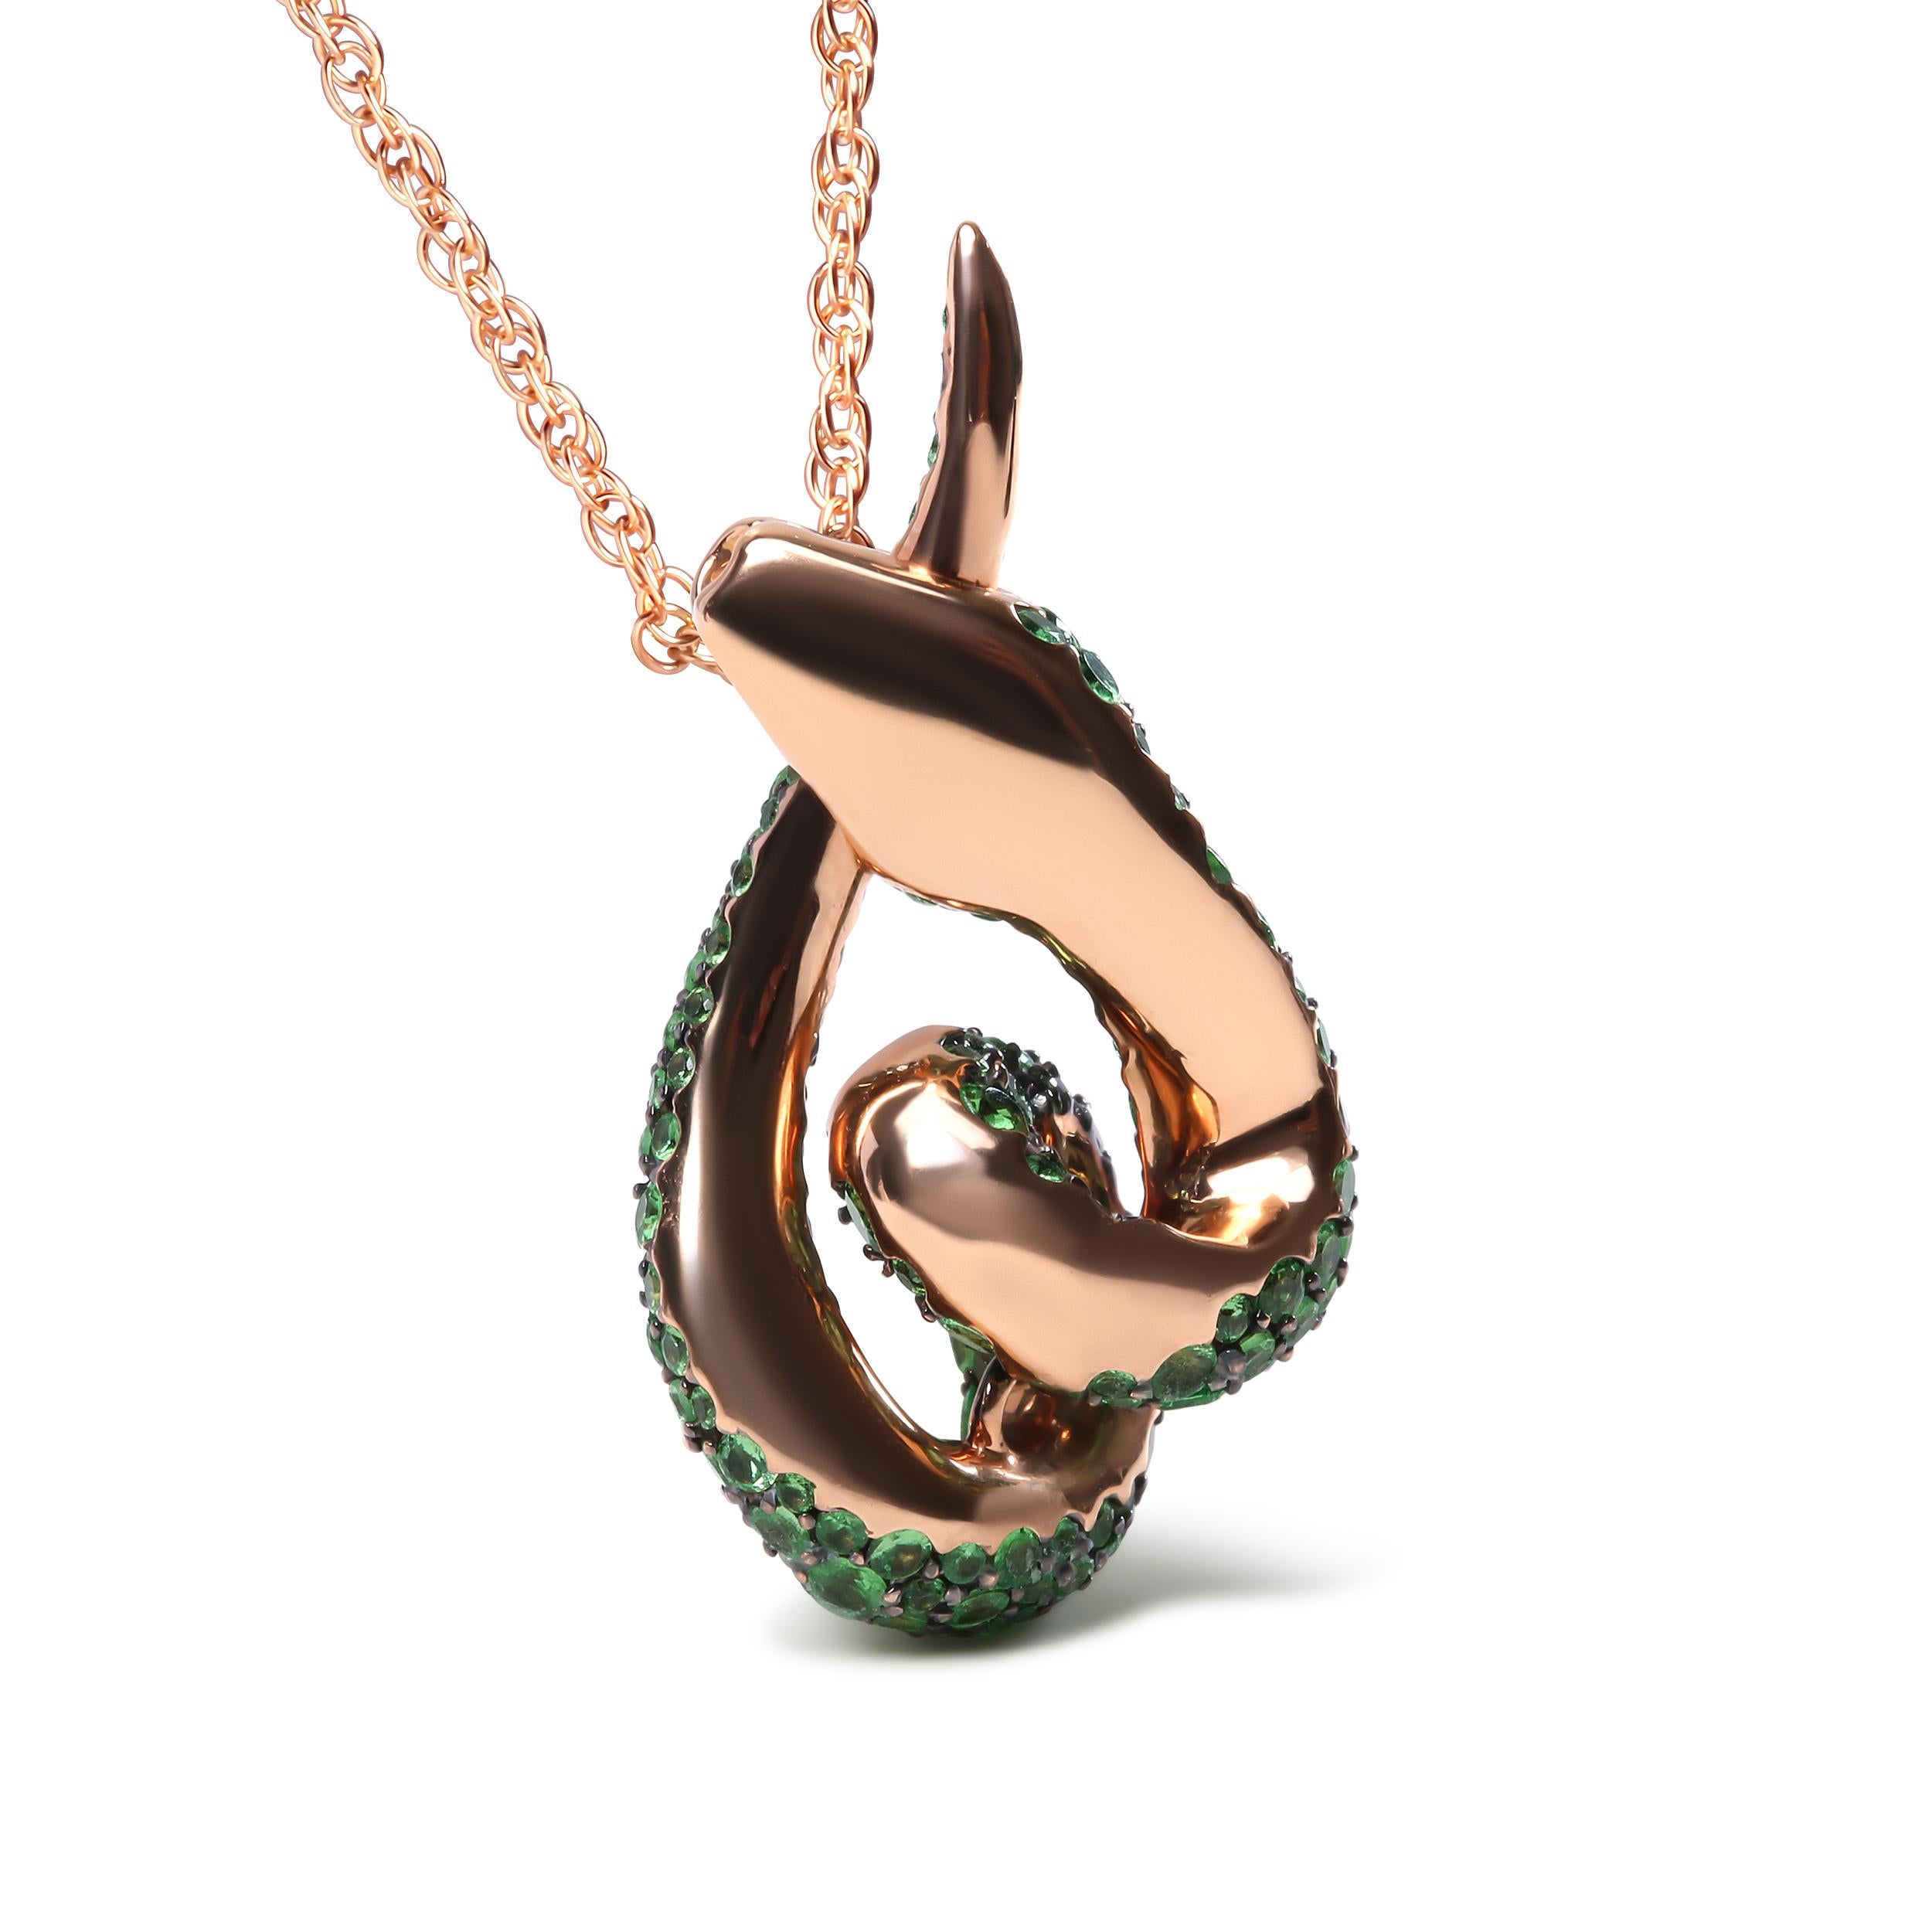 This animal inspired pendant necklace features a free-spirited snake design crafted of genuine 18k rose gold, a metal that will stay tarnish-free for years to come. The spiraled serpent is encrusted with 1.8mm, 1.5mm, 1mm, and 0.80mm round